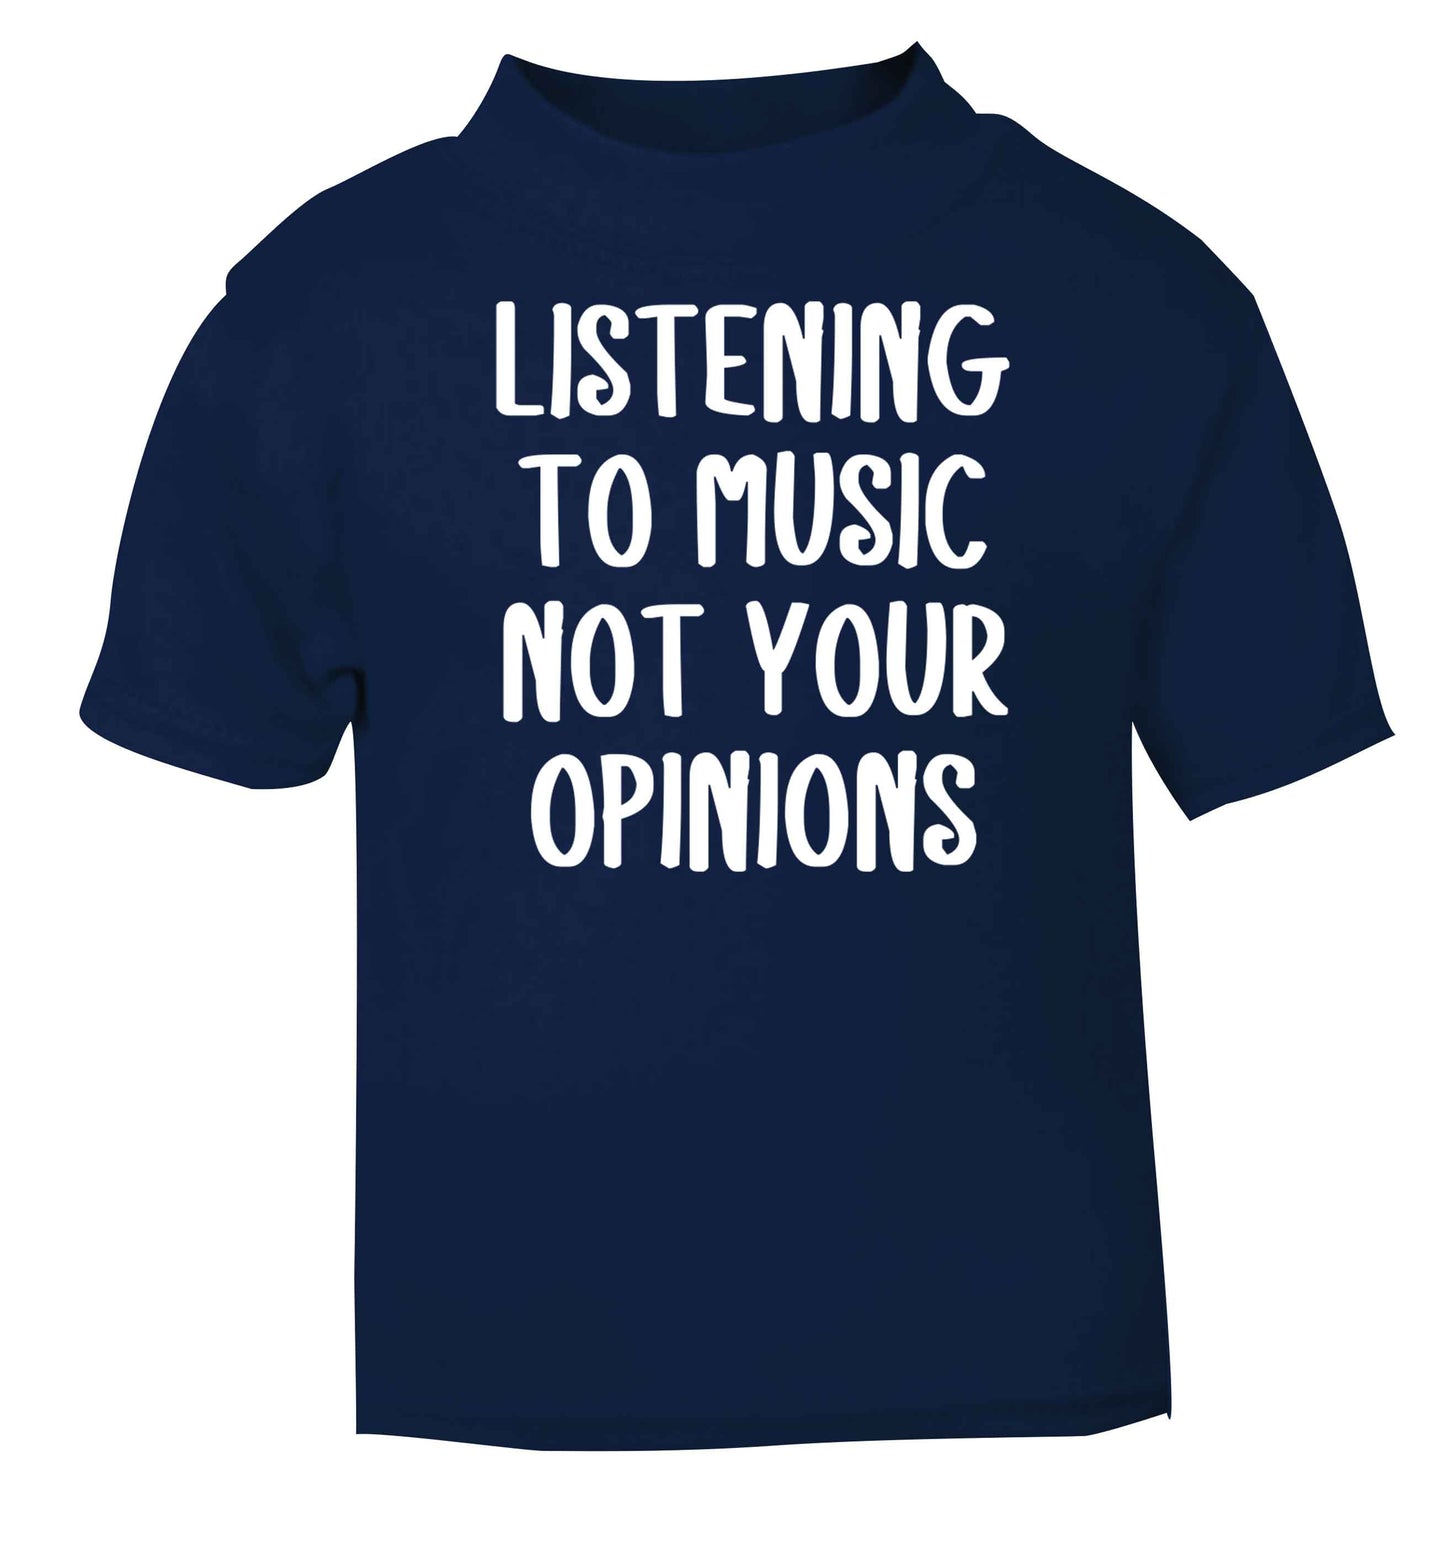 Listening to music not your opinions navy baby toddler Tshirt 2 Years